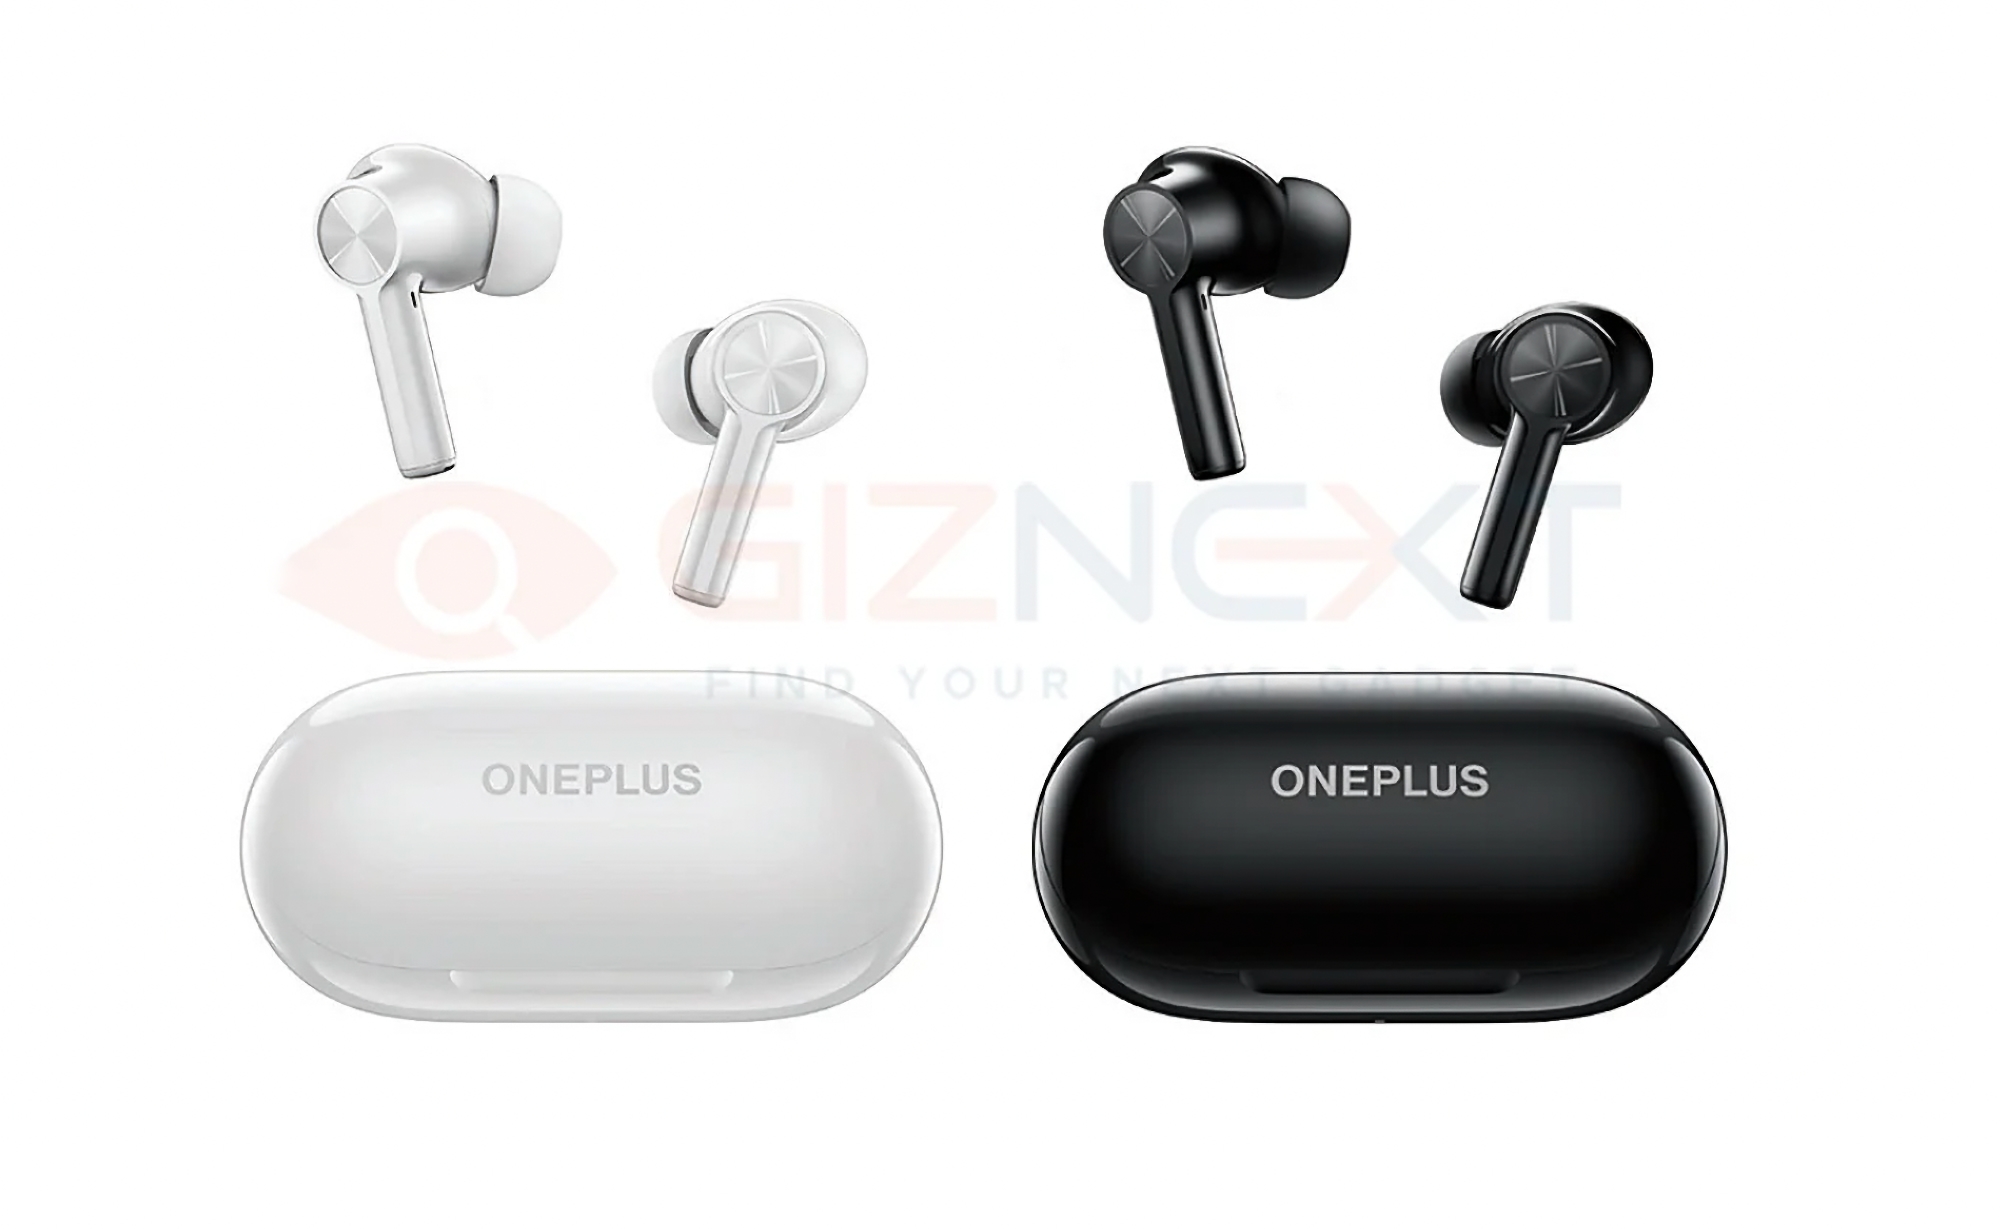 This is what OnePlus Buds Z2, the company's low-cost TWS headphones with active noise cancellation, will look like